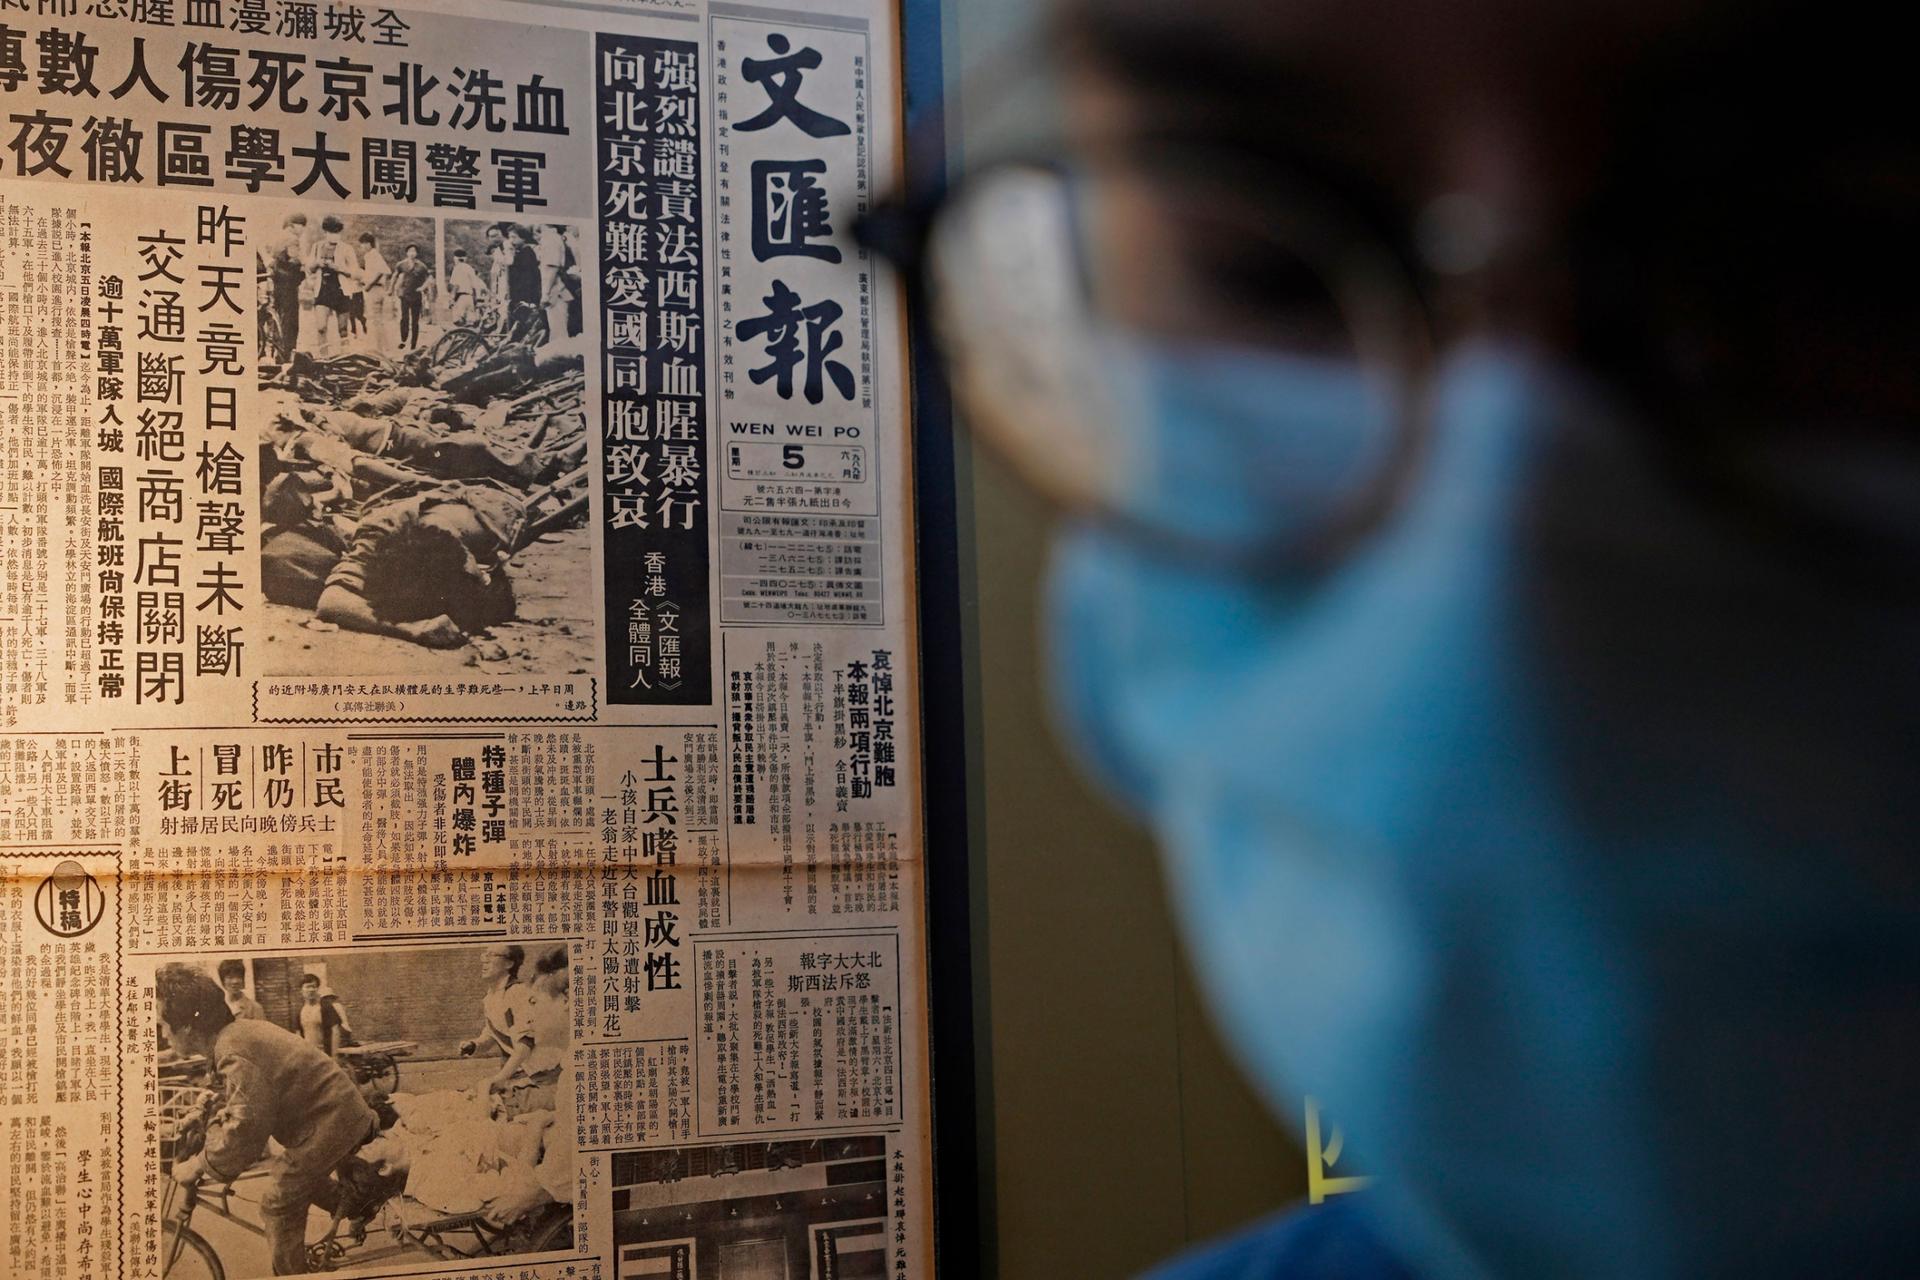 A newspaper clipping is shown in the background with a person in the near ground wearing a facemask and glasses is shown in blurred focus.